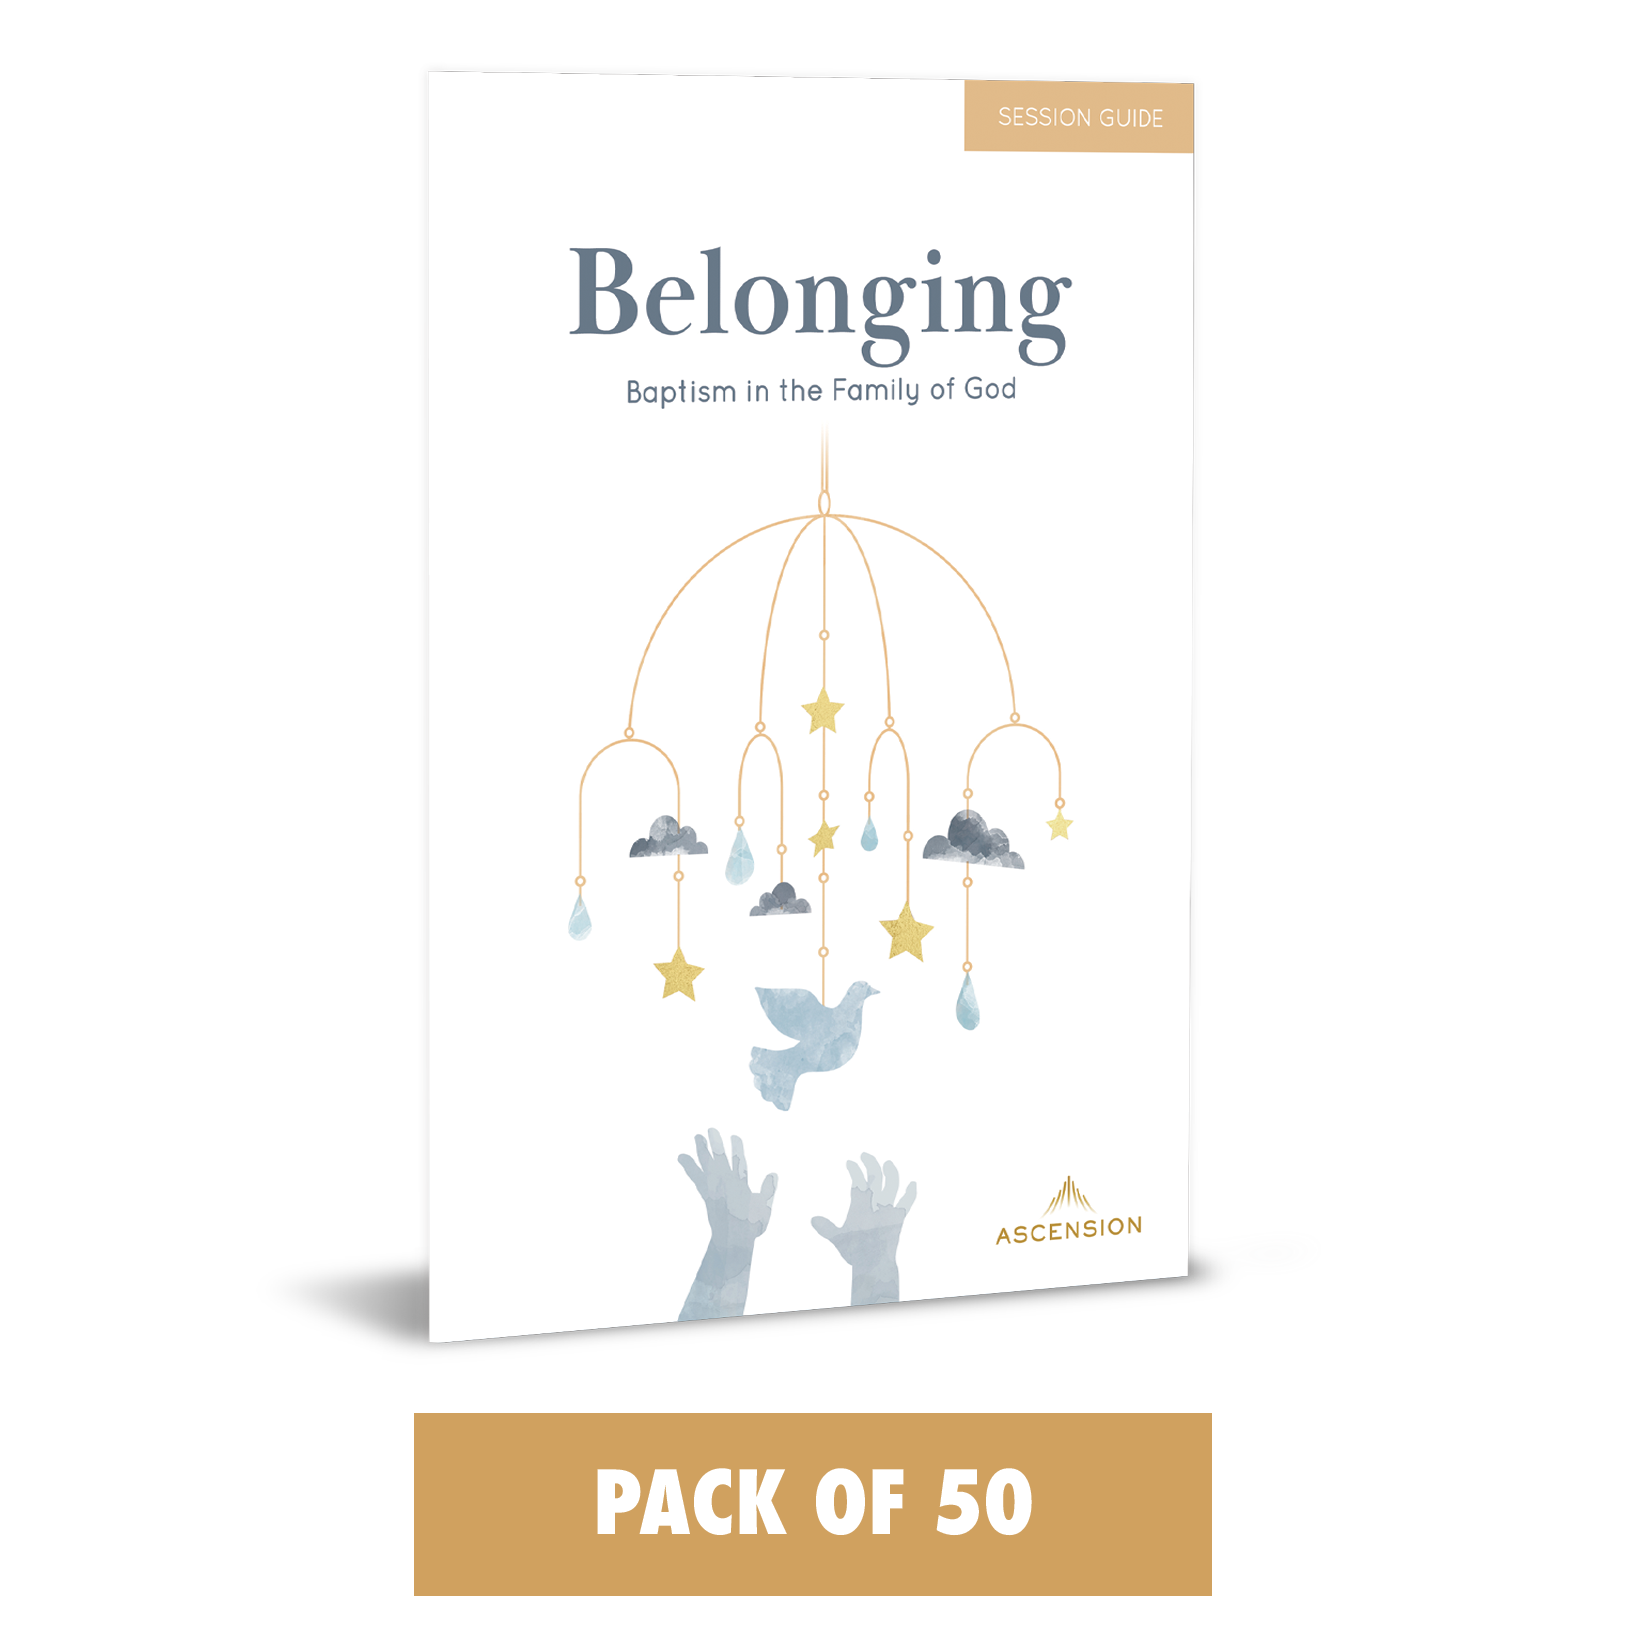 Belonging: Baptism in the Family of God, Session Guide (Pack of 50)